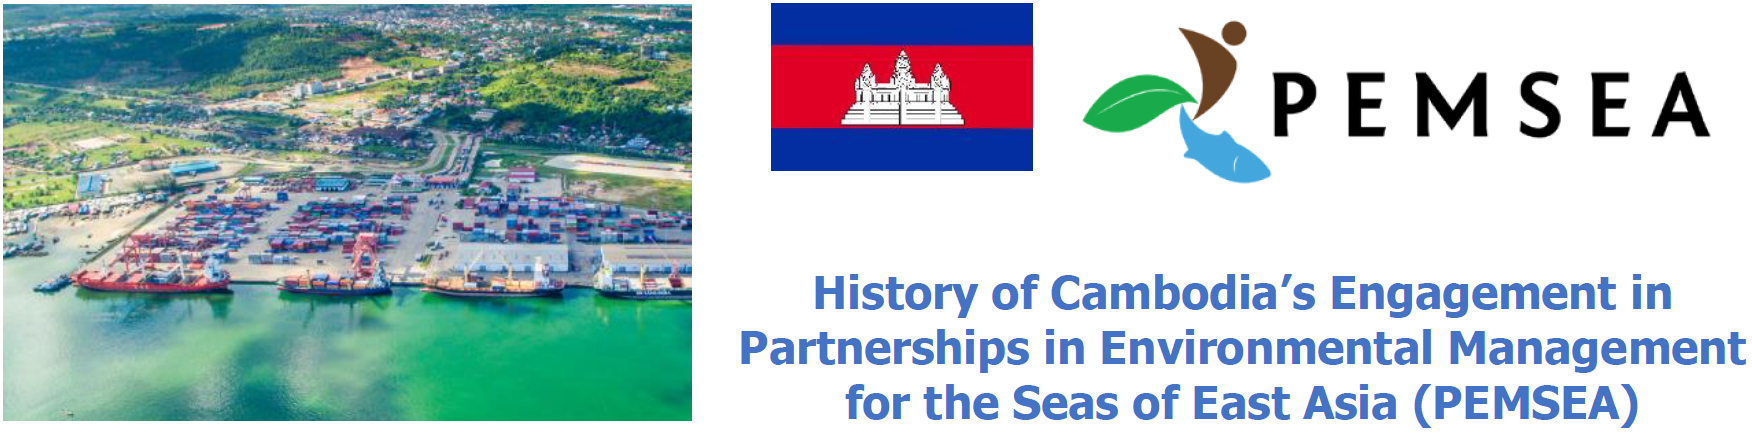 History of Cambodia's engagement in PEMSEA